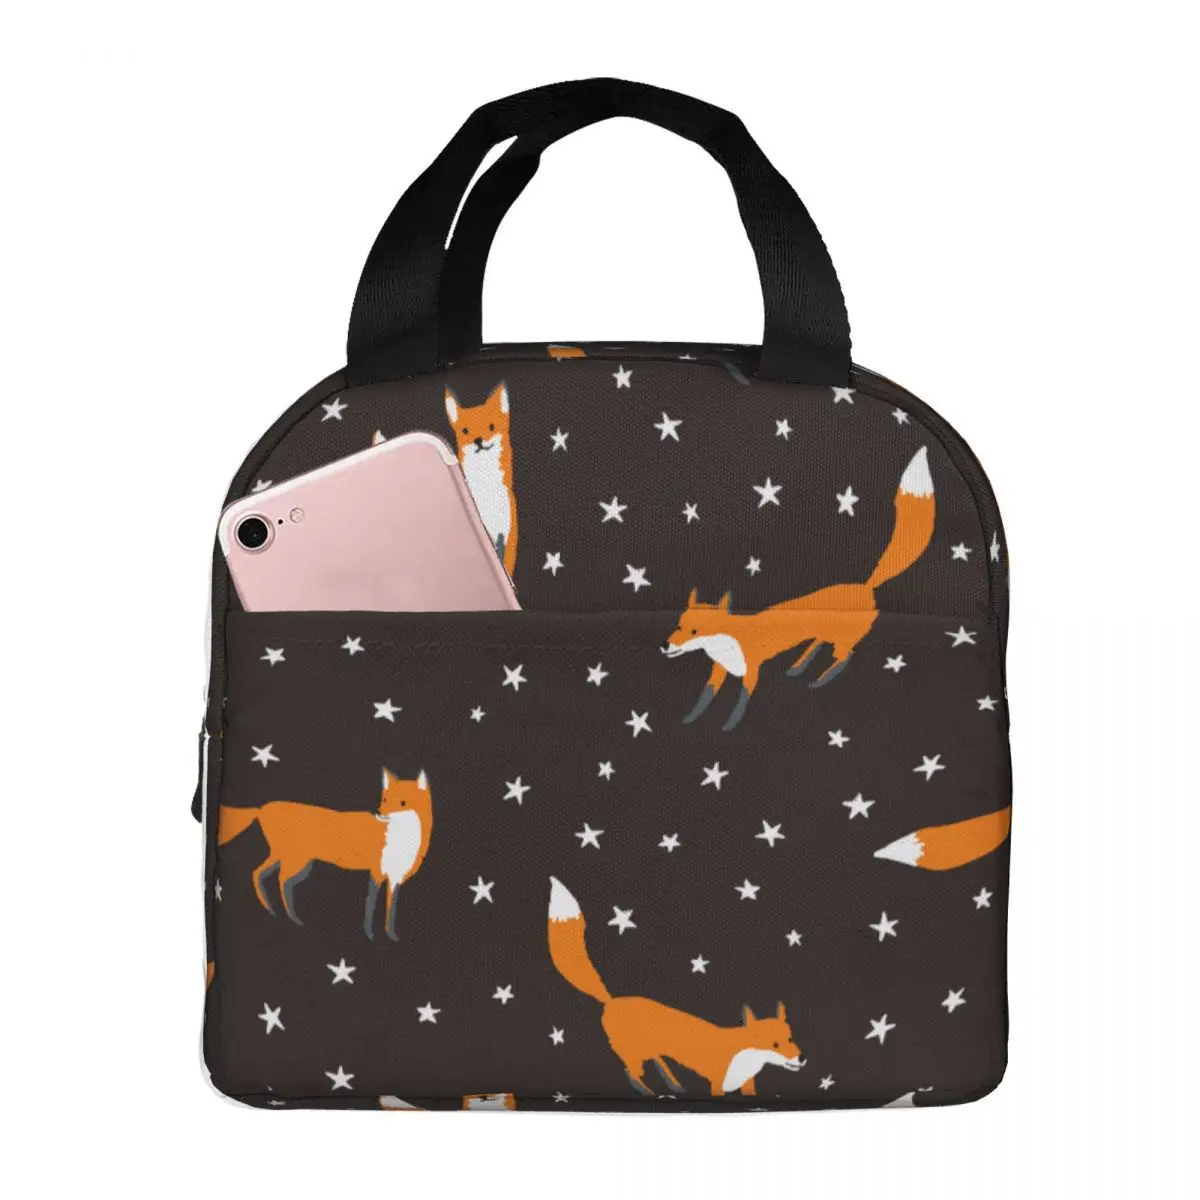 Lunch Bag for Women Kids Christmas Forest Fox Animals Stars Thermal Cooler Portable Picnic Travel Oxford Tote Bento Pouch